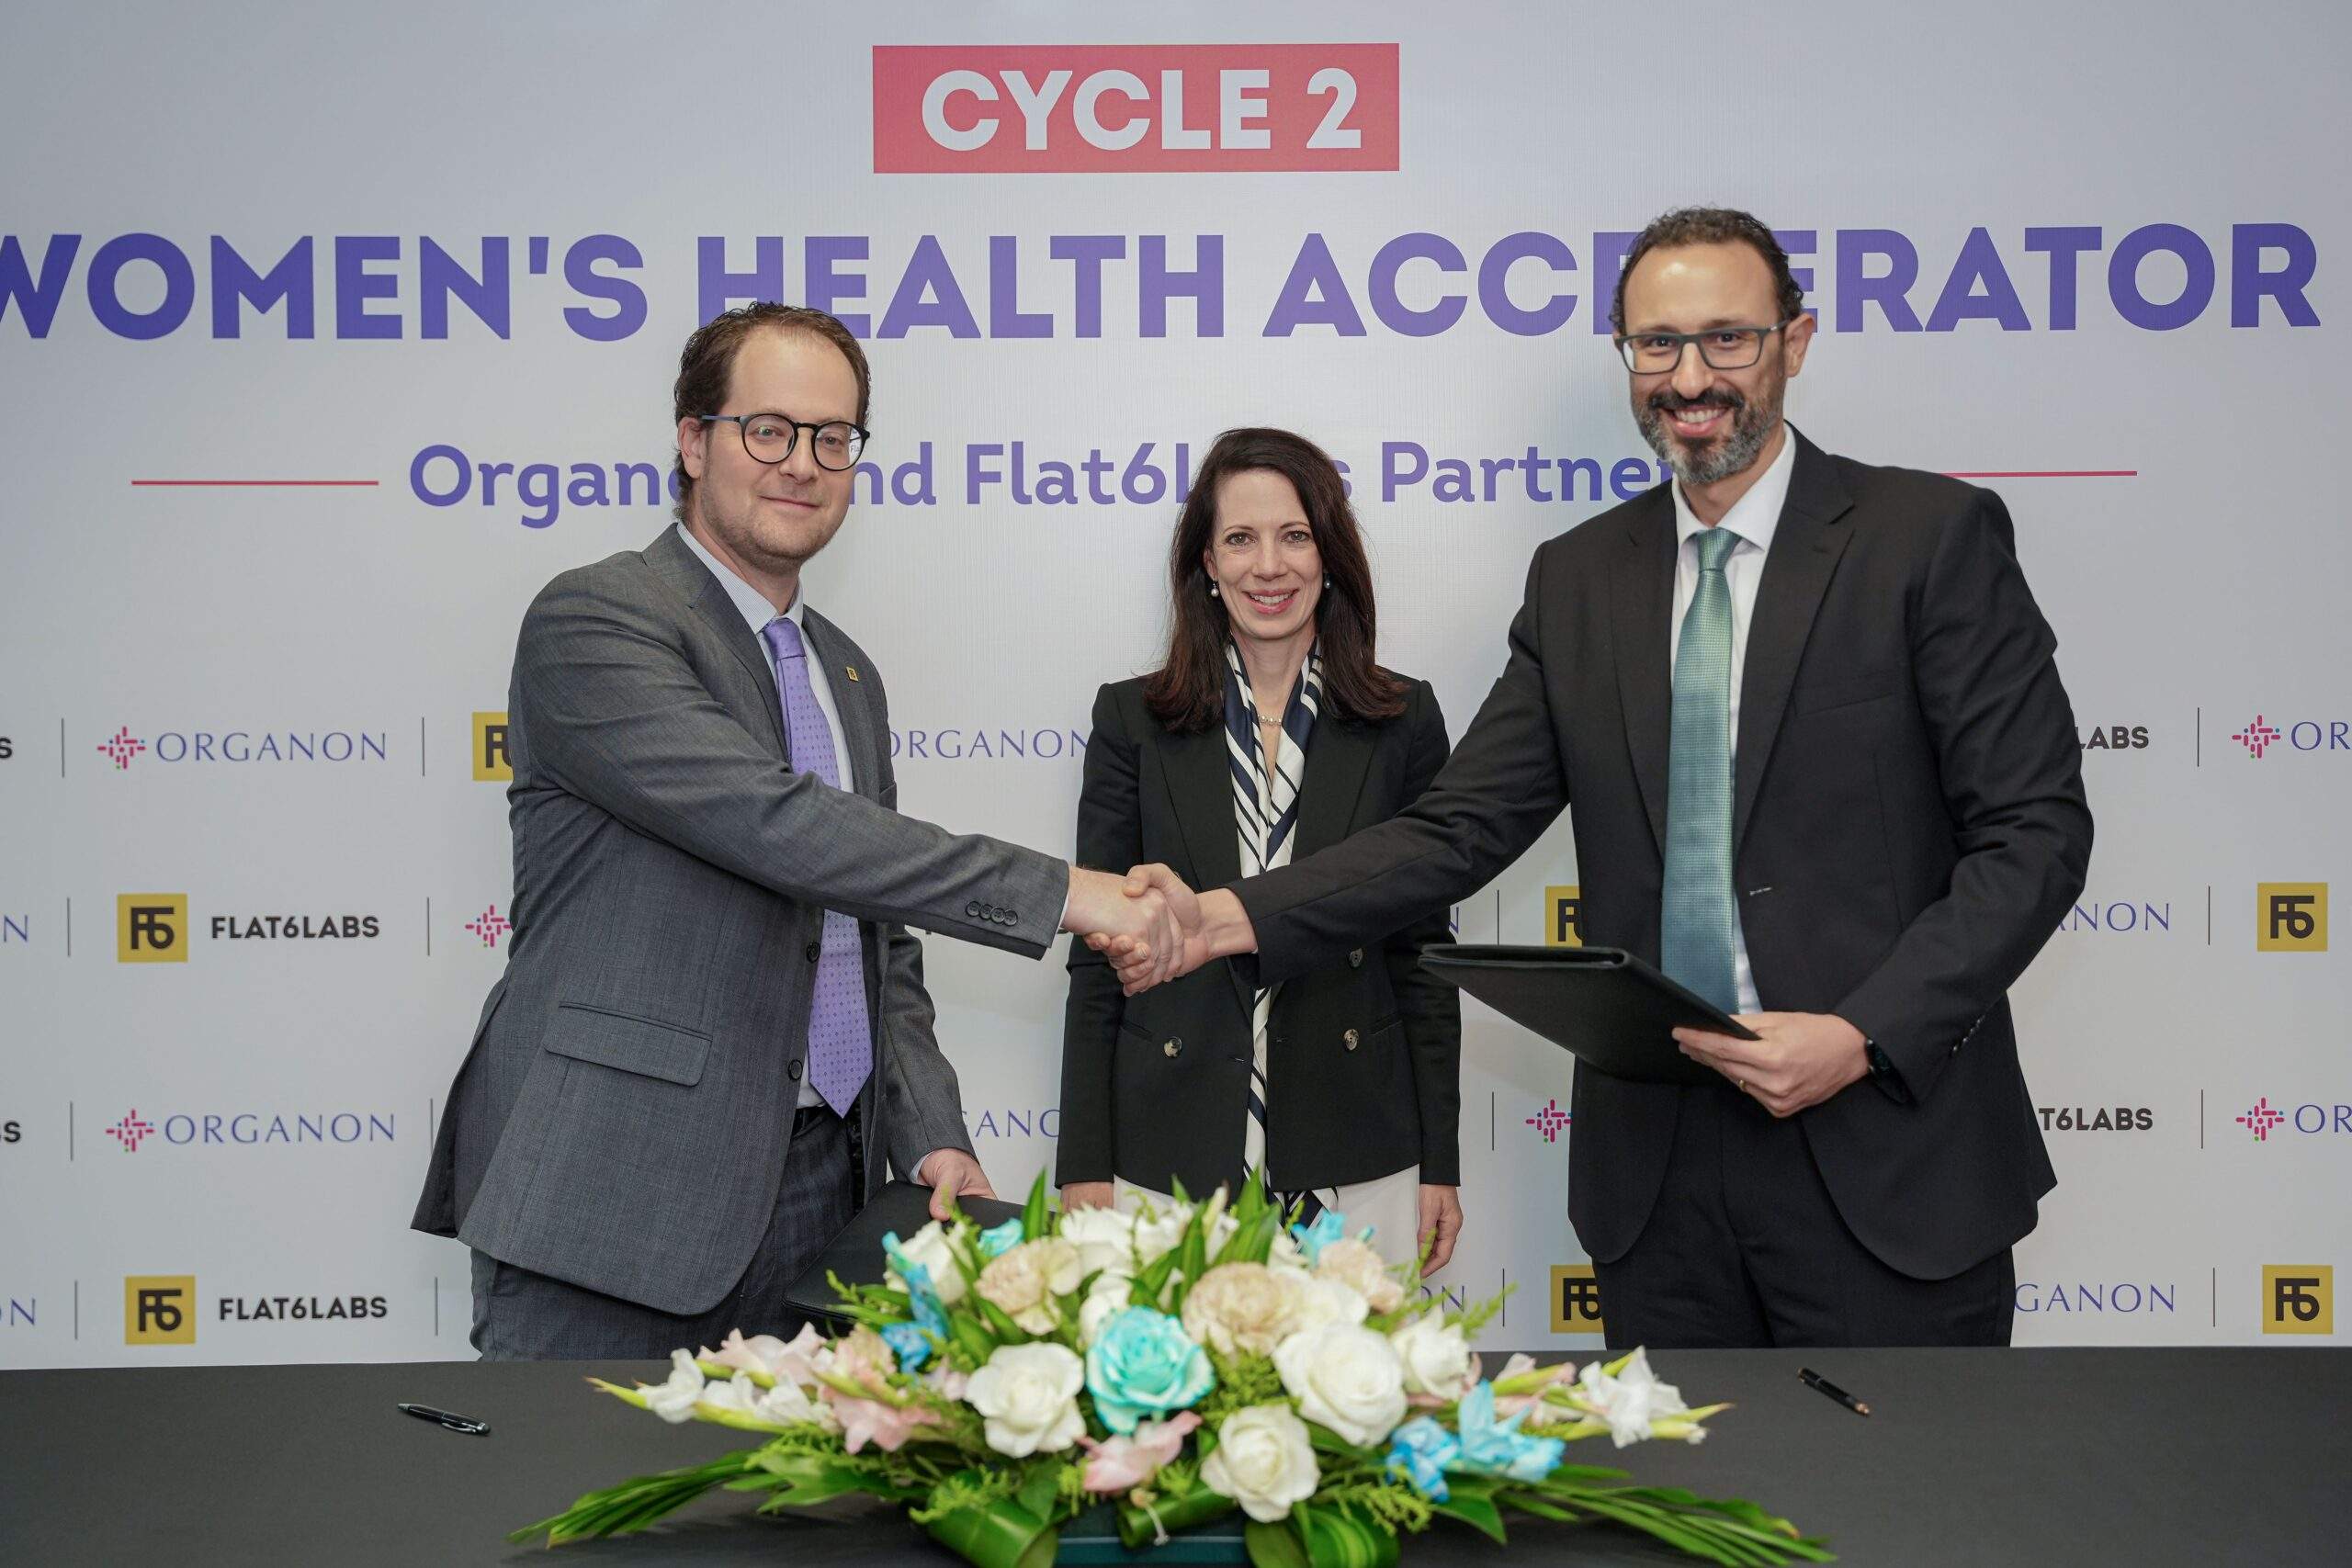 Organon and Flat6Labs Announce Second Cycle of Women’s Health Accelerator Program, Expanding Focus to Address Key Women’s Health Challenges Across MENAT